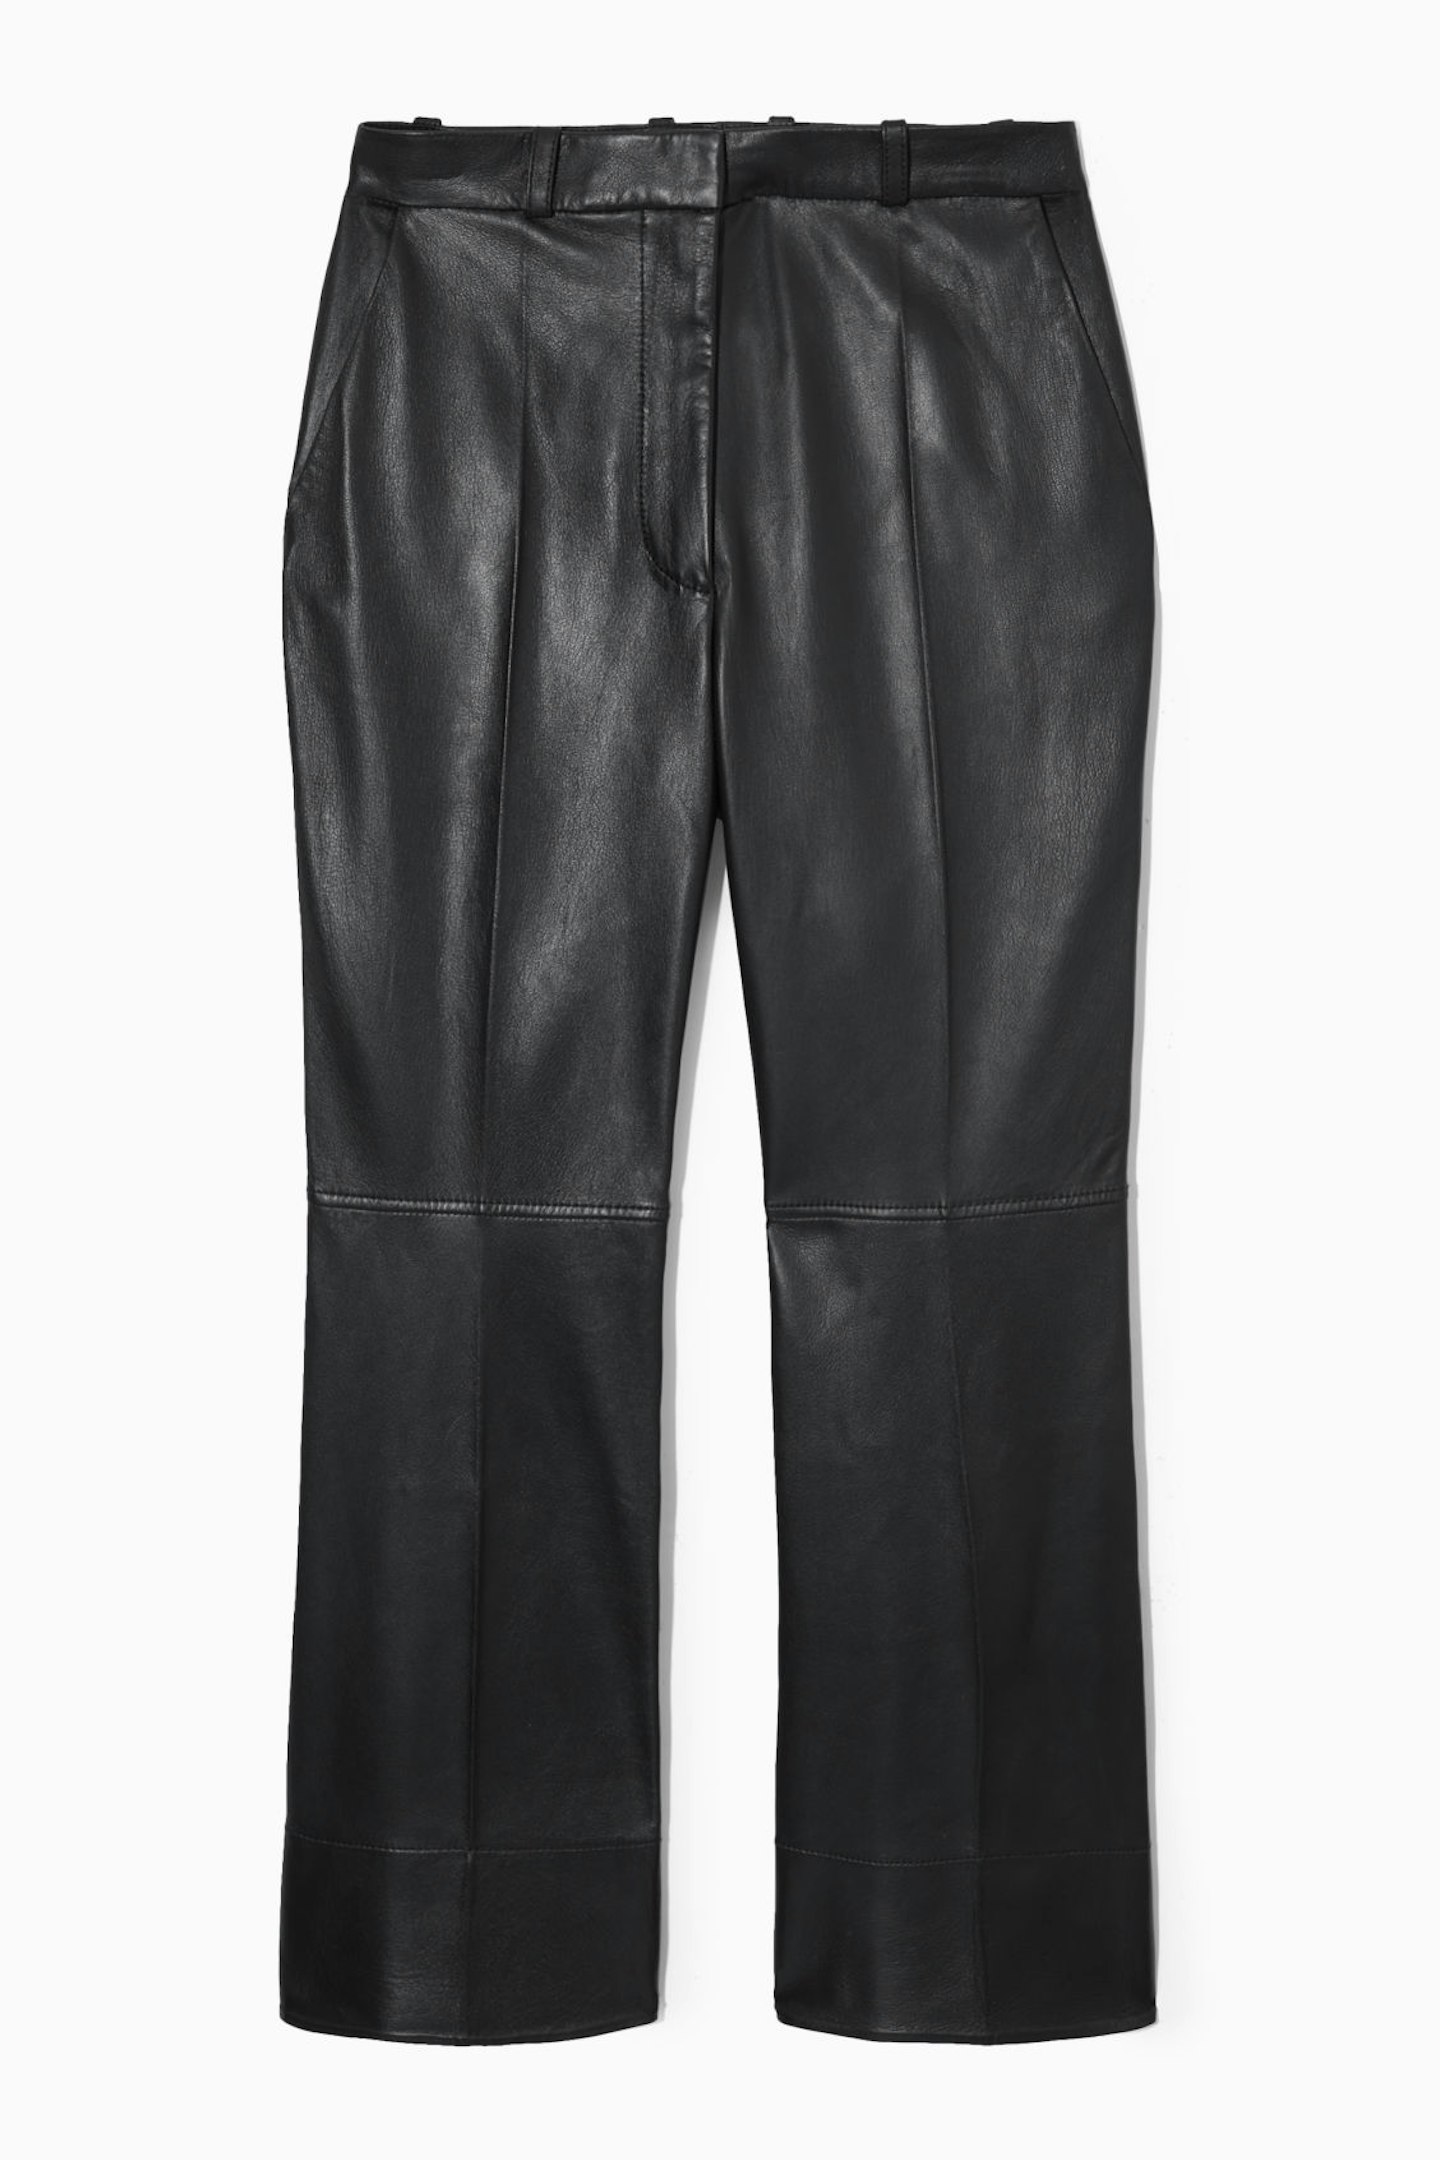 COS, Tailored Flared Leather Trousers